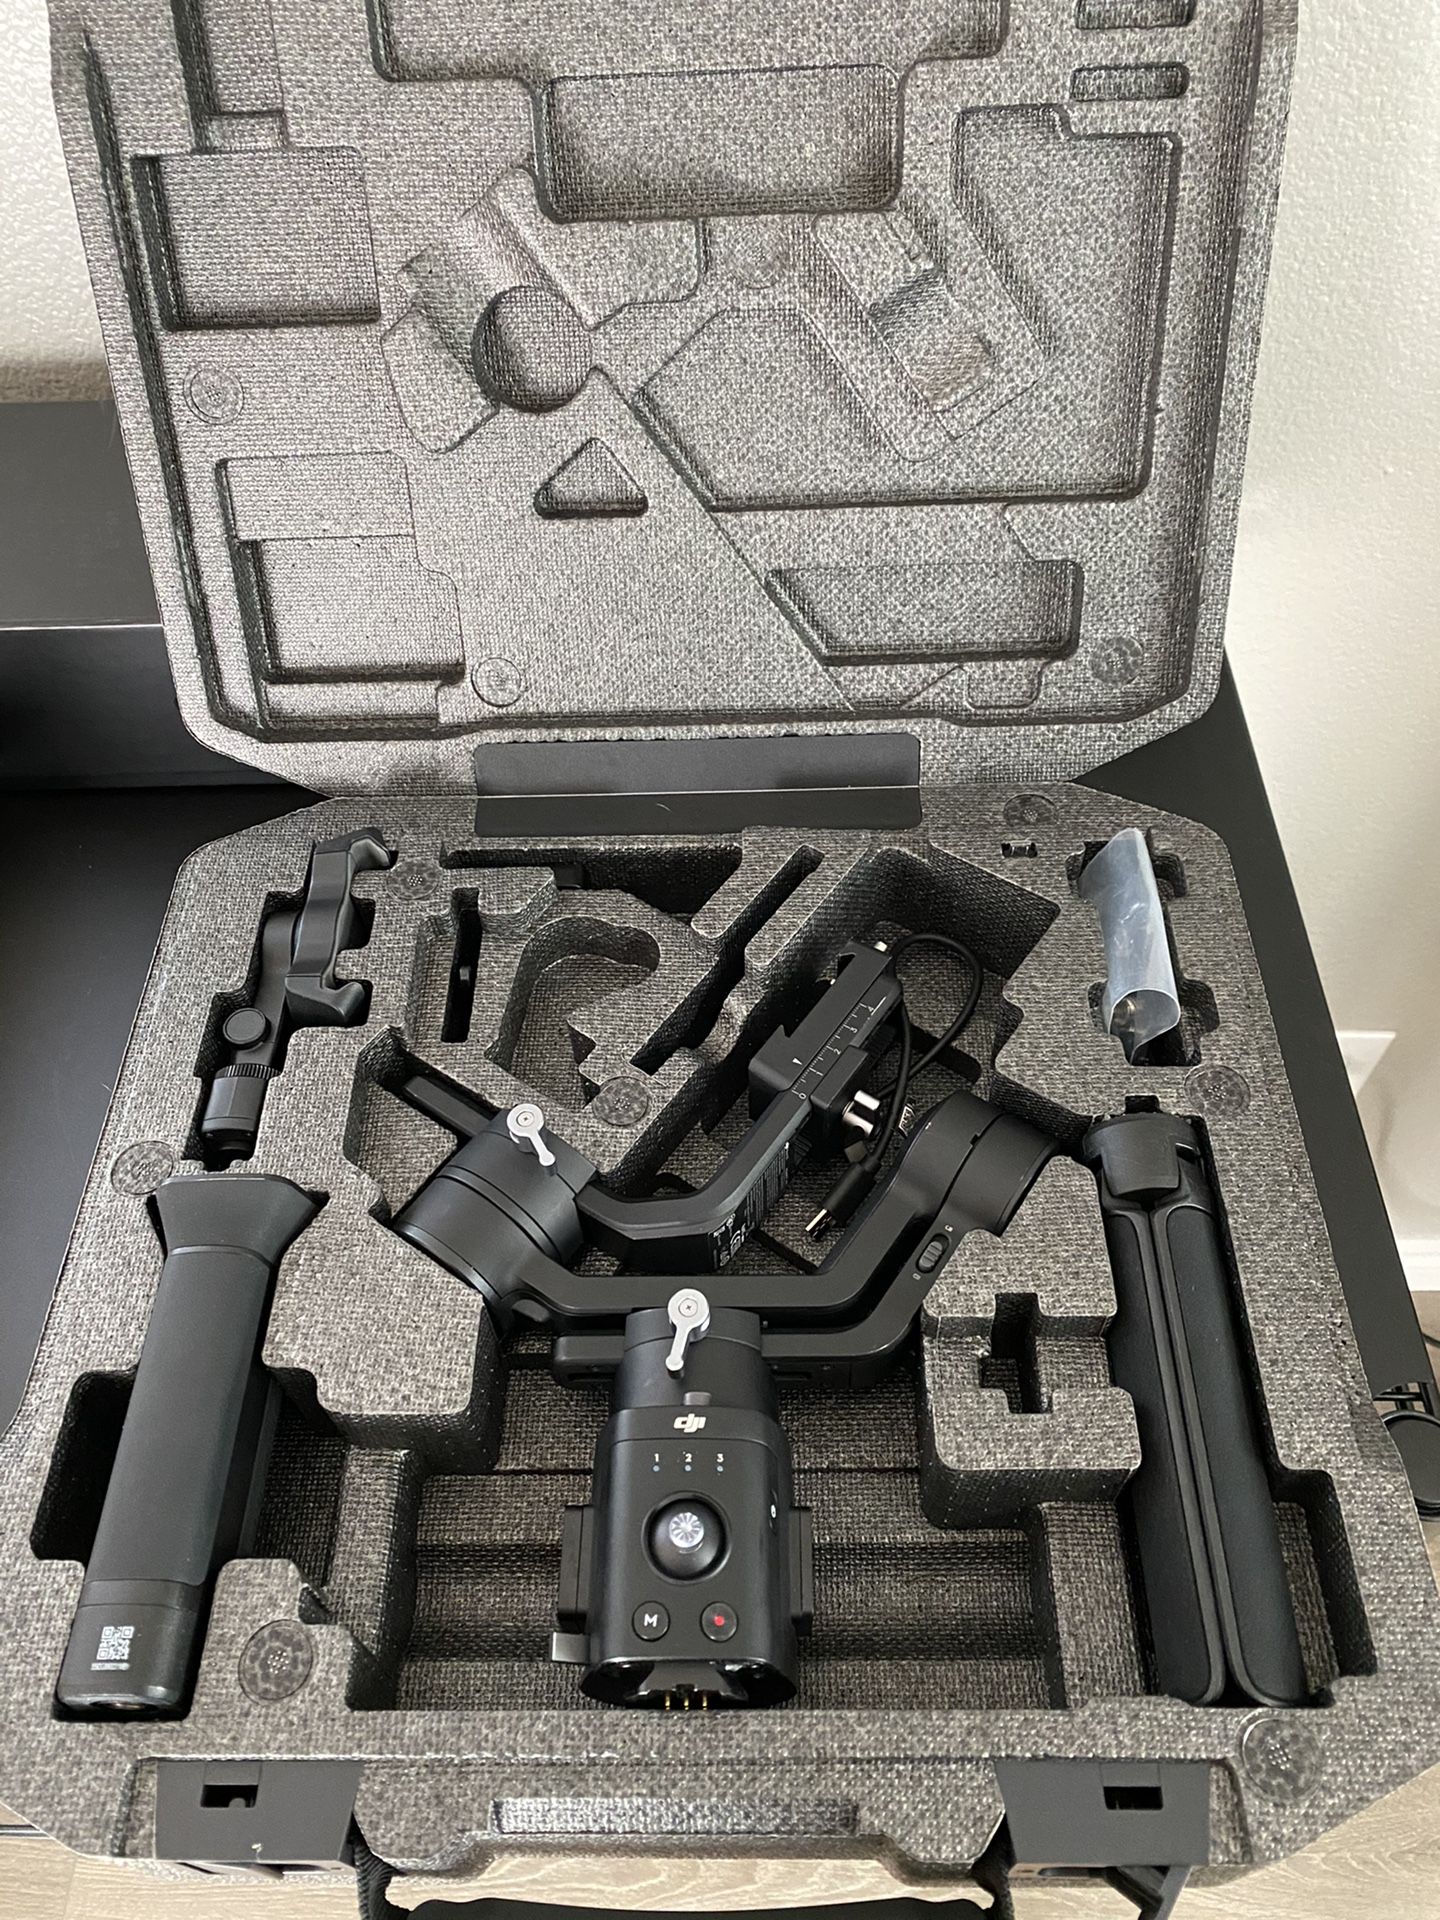 DJI Ronin SC with Dual Grip with box and all accessories.